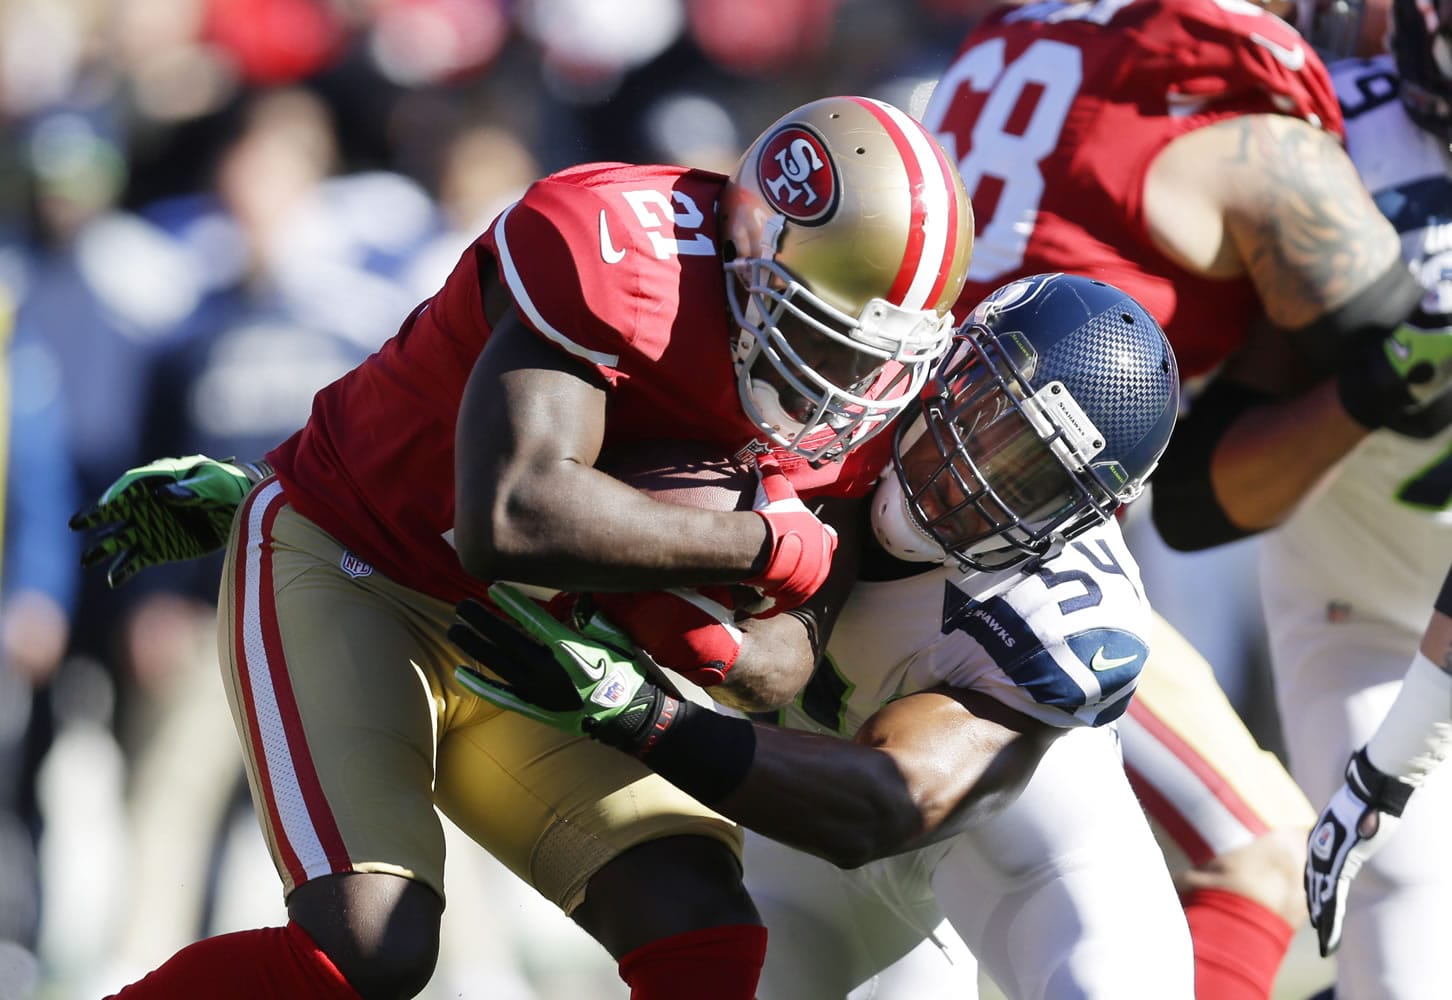 San Francisco 49ers running back Frank Gore (21) is tackled by Seattle Seahawks' middle linebacker Bobby Wagner (54) in the first half Sunday.